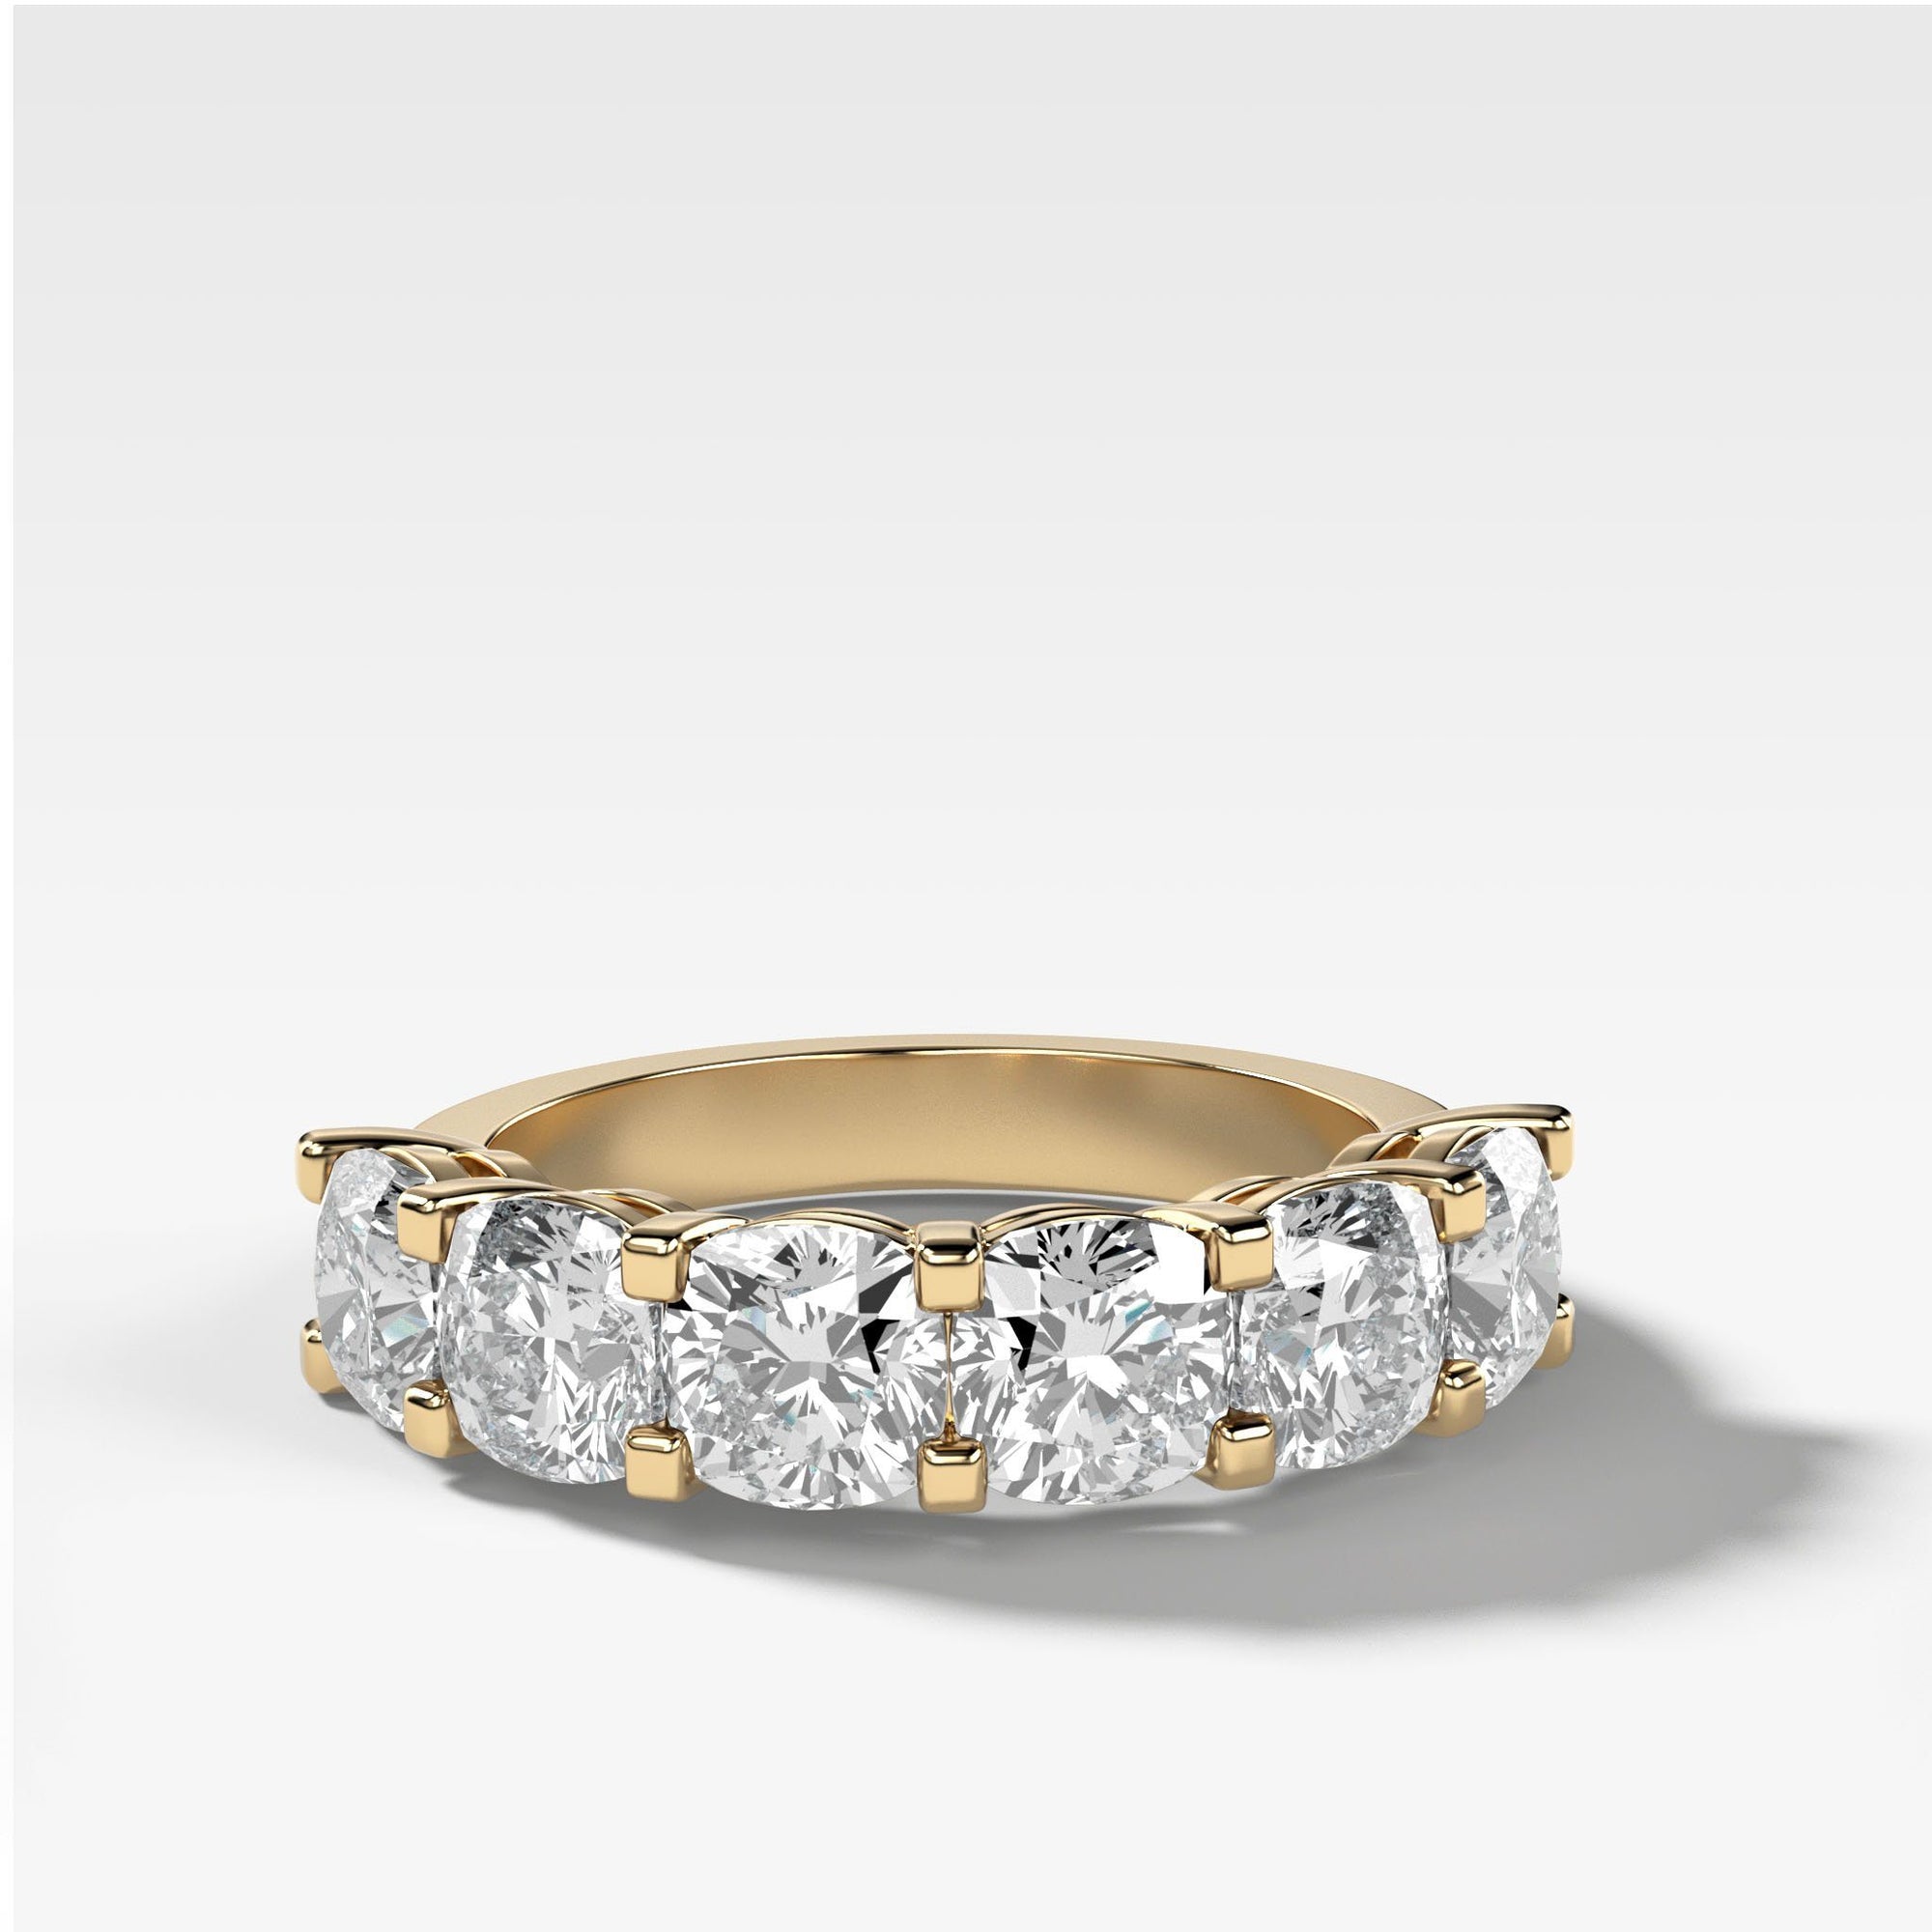 Six Stone Shared Prong Diamond Band With Cushion Cuts by Good Stone in Yellow Gold